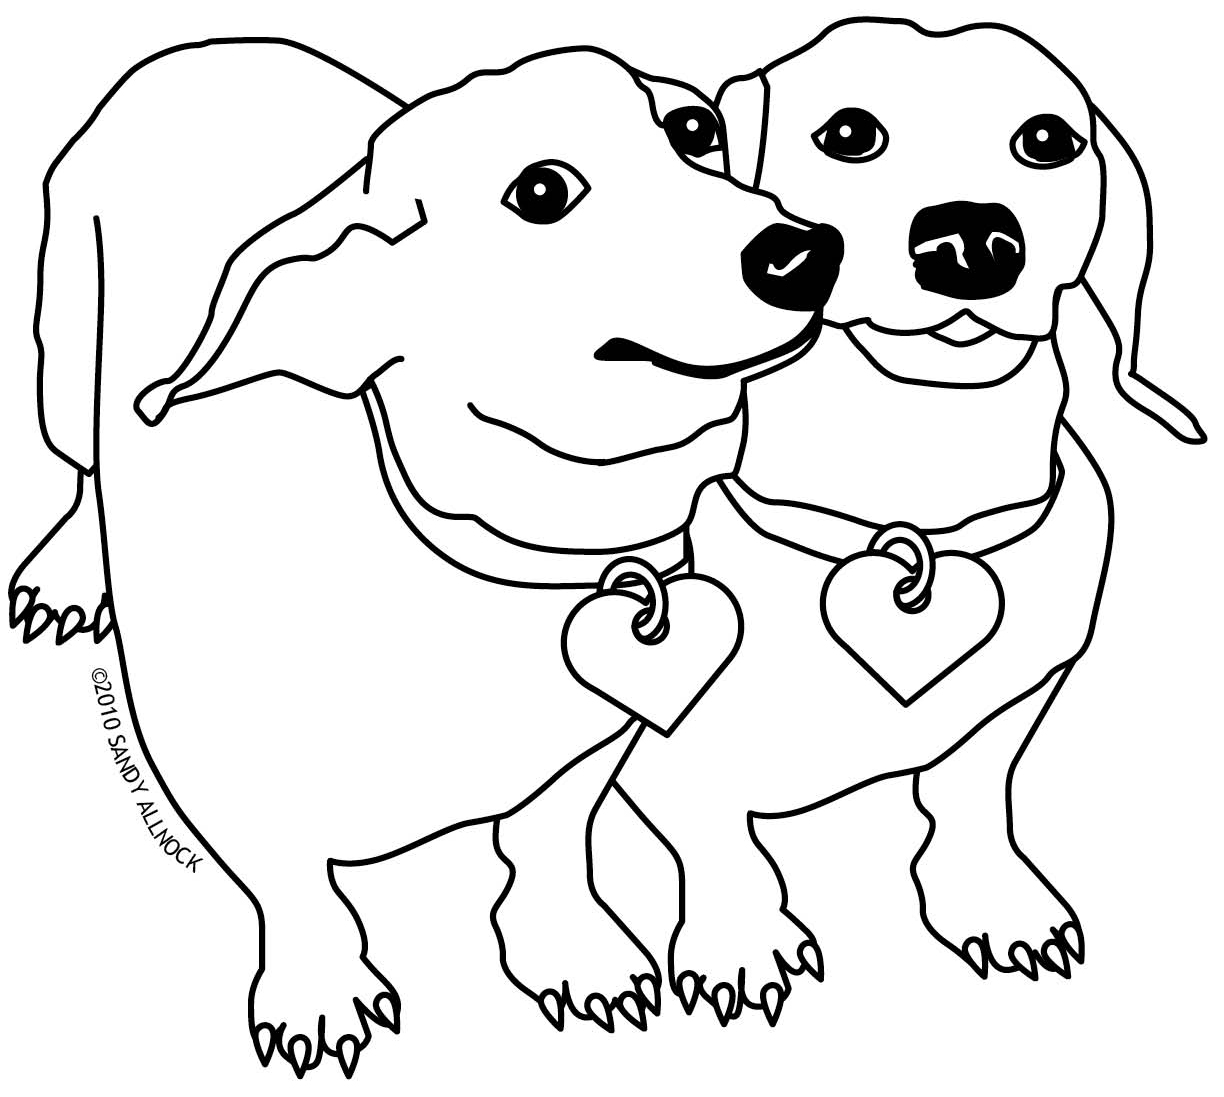 weiner-dog-drawing-at-getdrawings-free-download